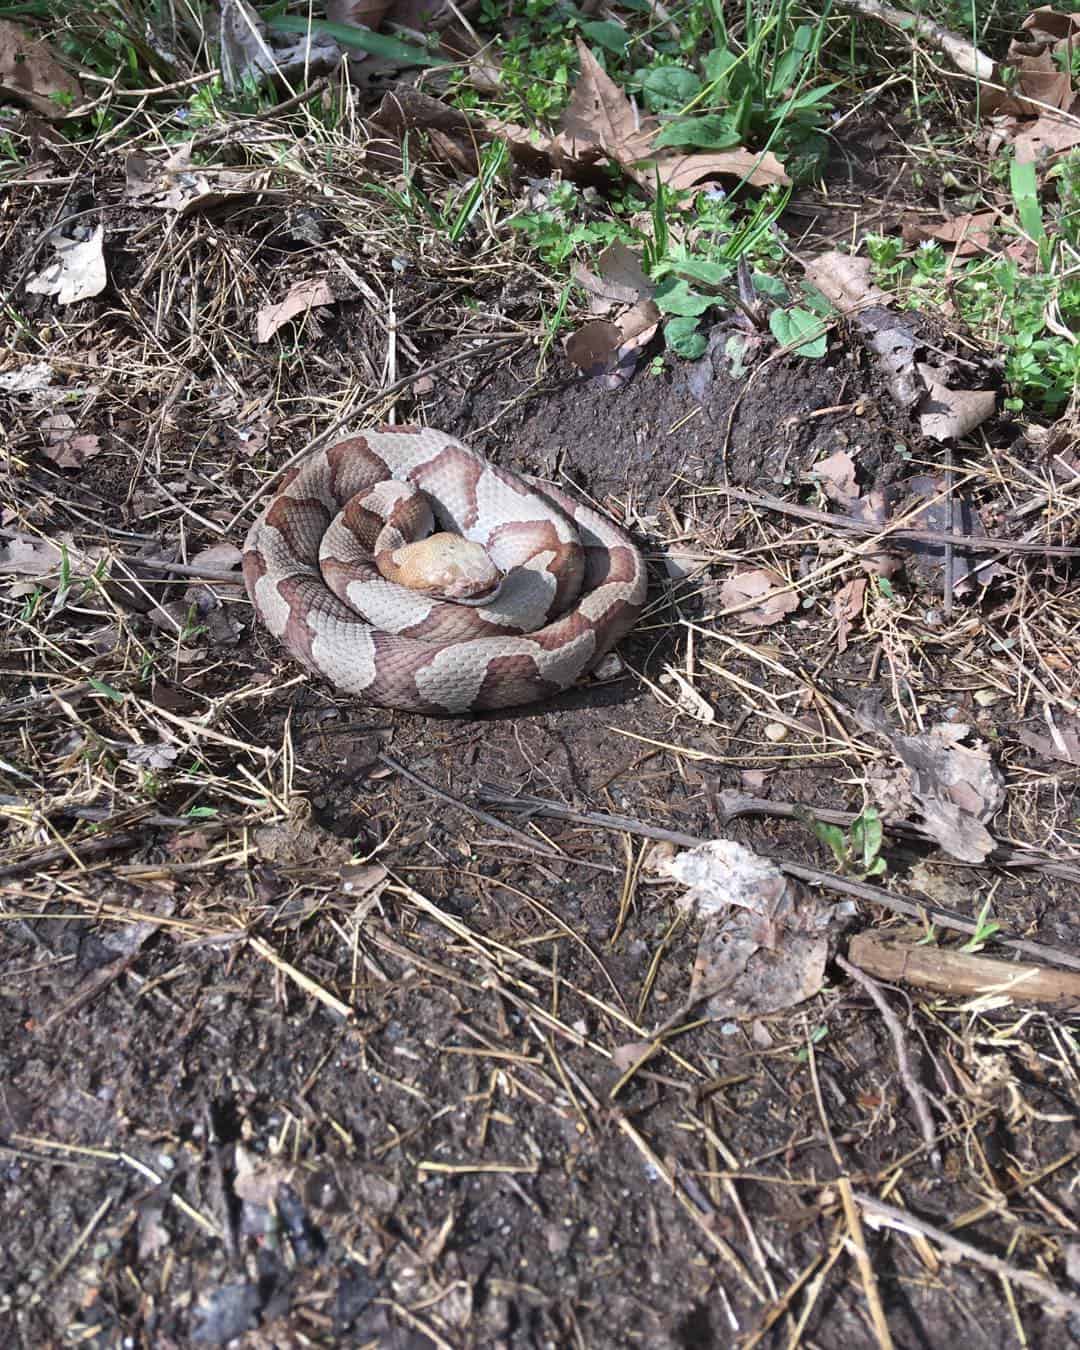 Other Methods to Get Rid of Copperhead Snakes